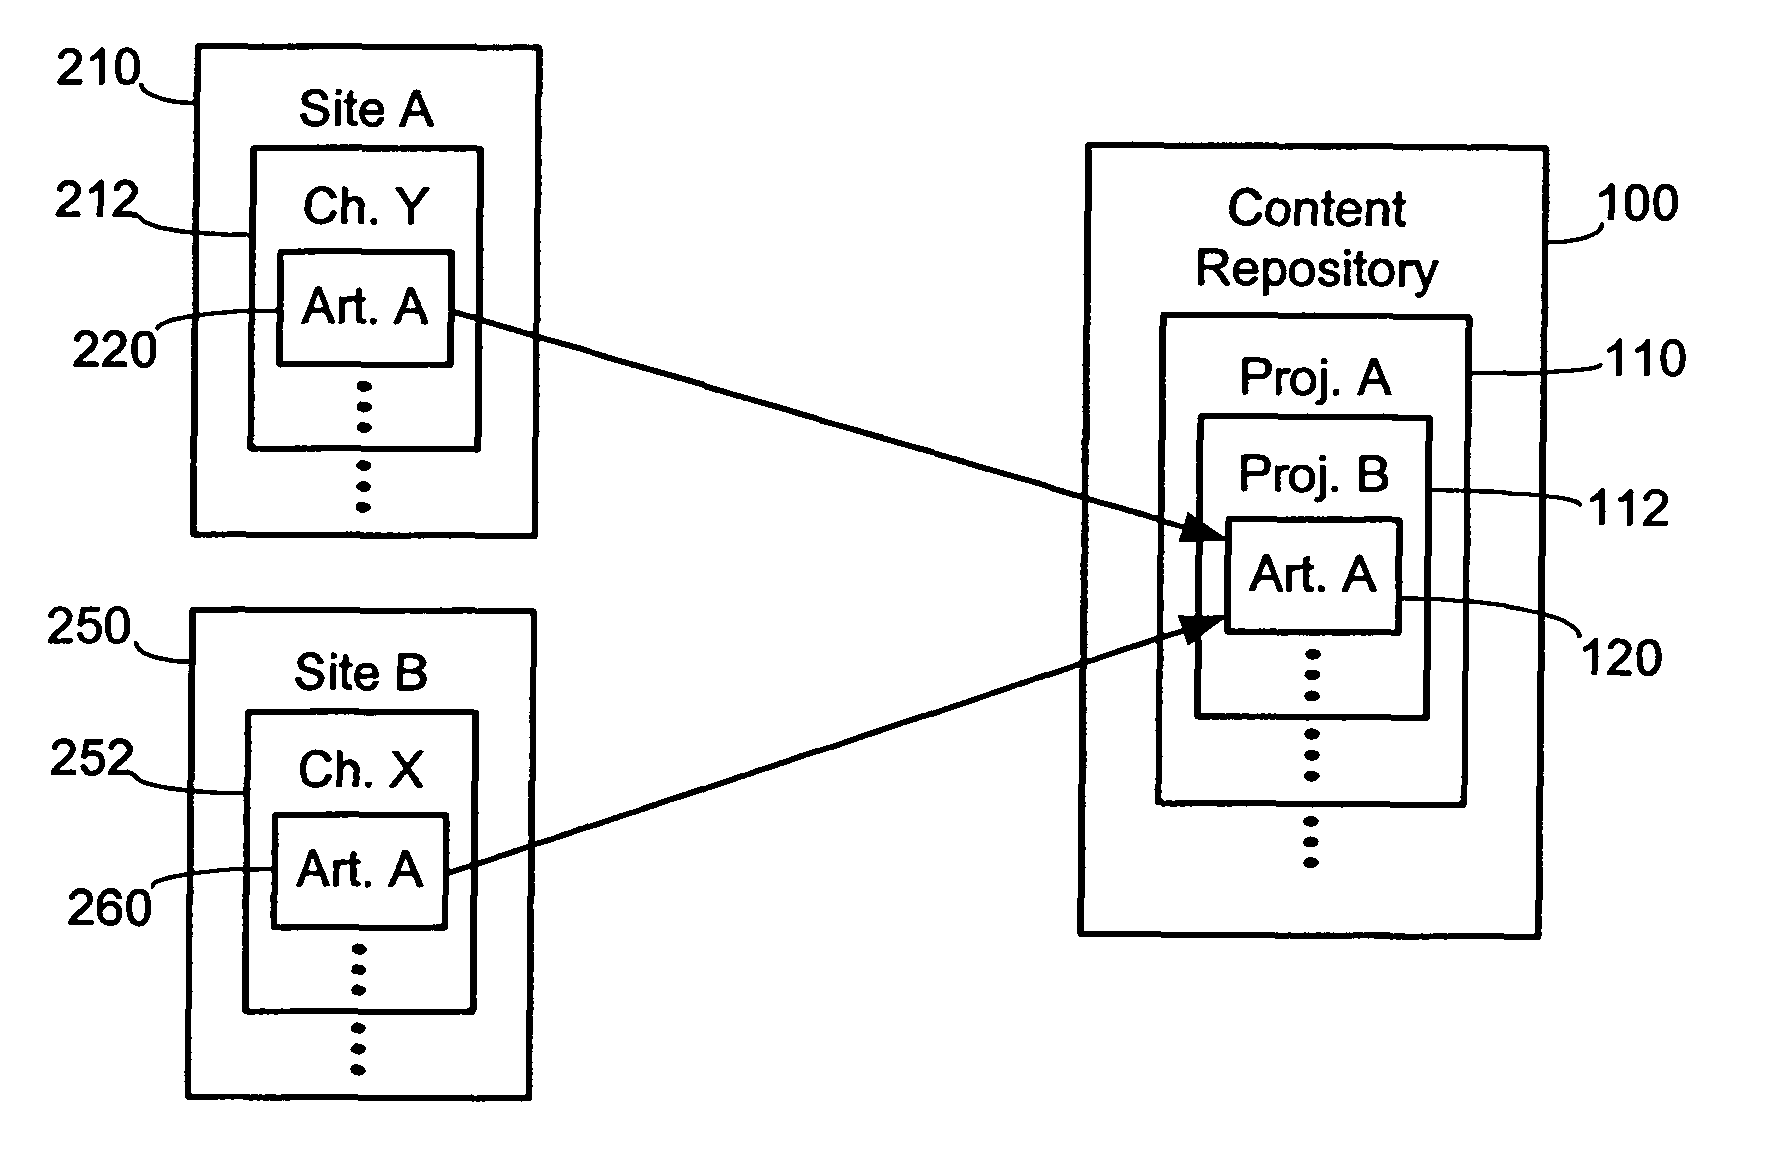 System and method for managing enterprise-level interrelated site, channel, and content objects